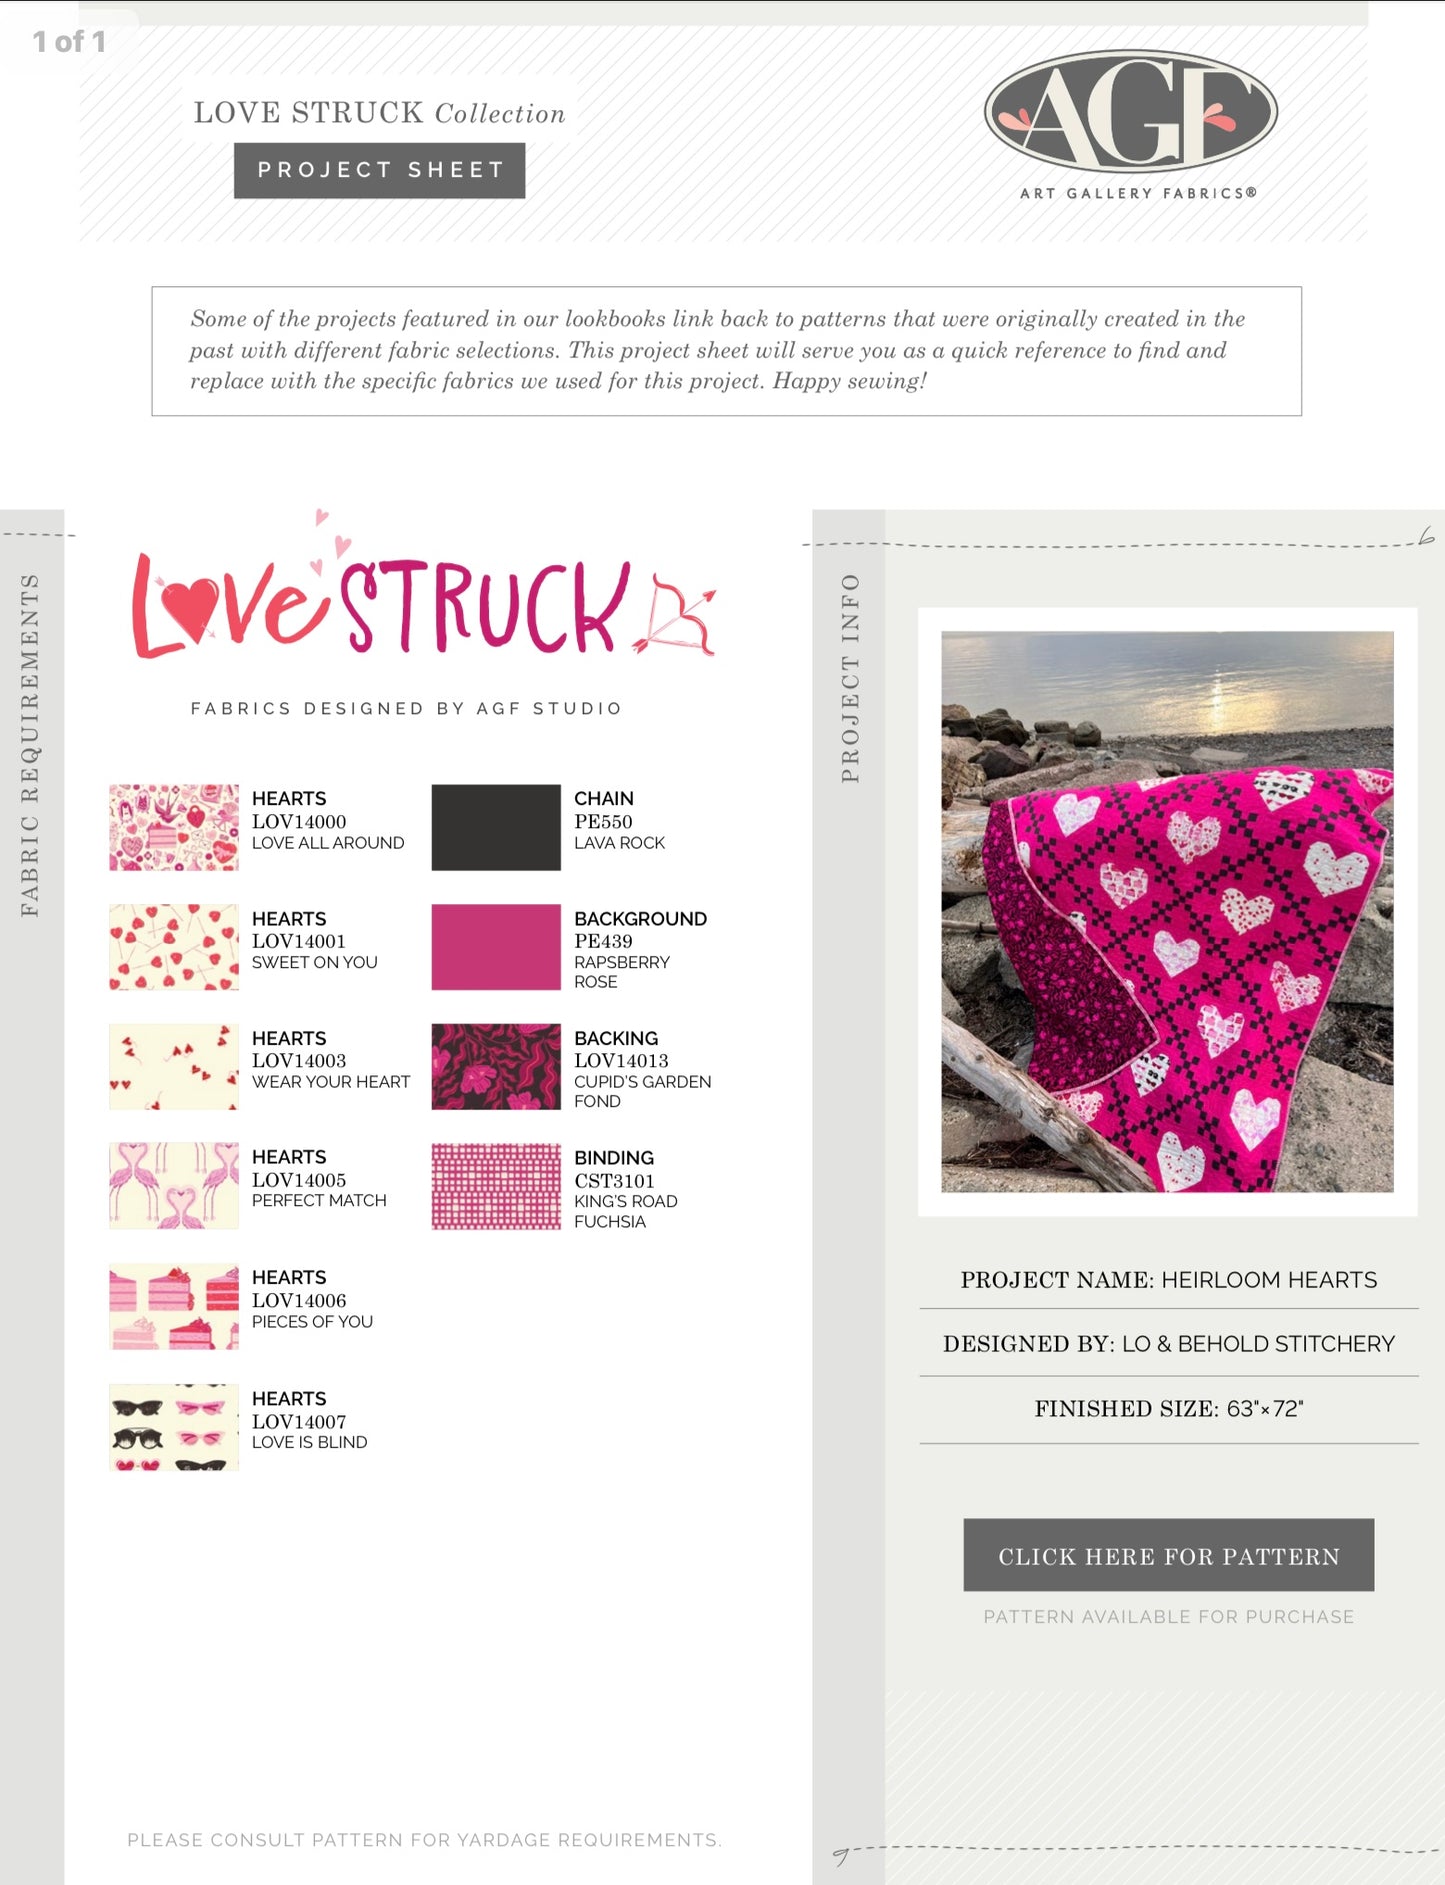 Heirloom Hearts Quilt Kit featuring Love Struck by AGF Studio